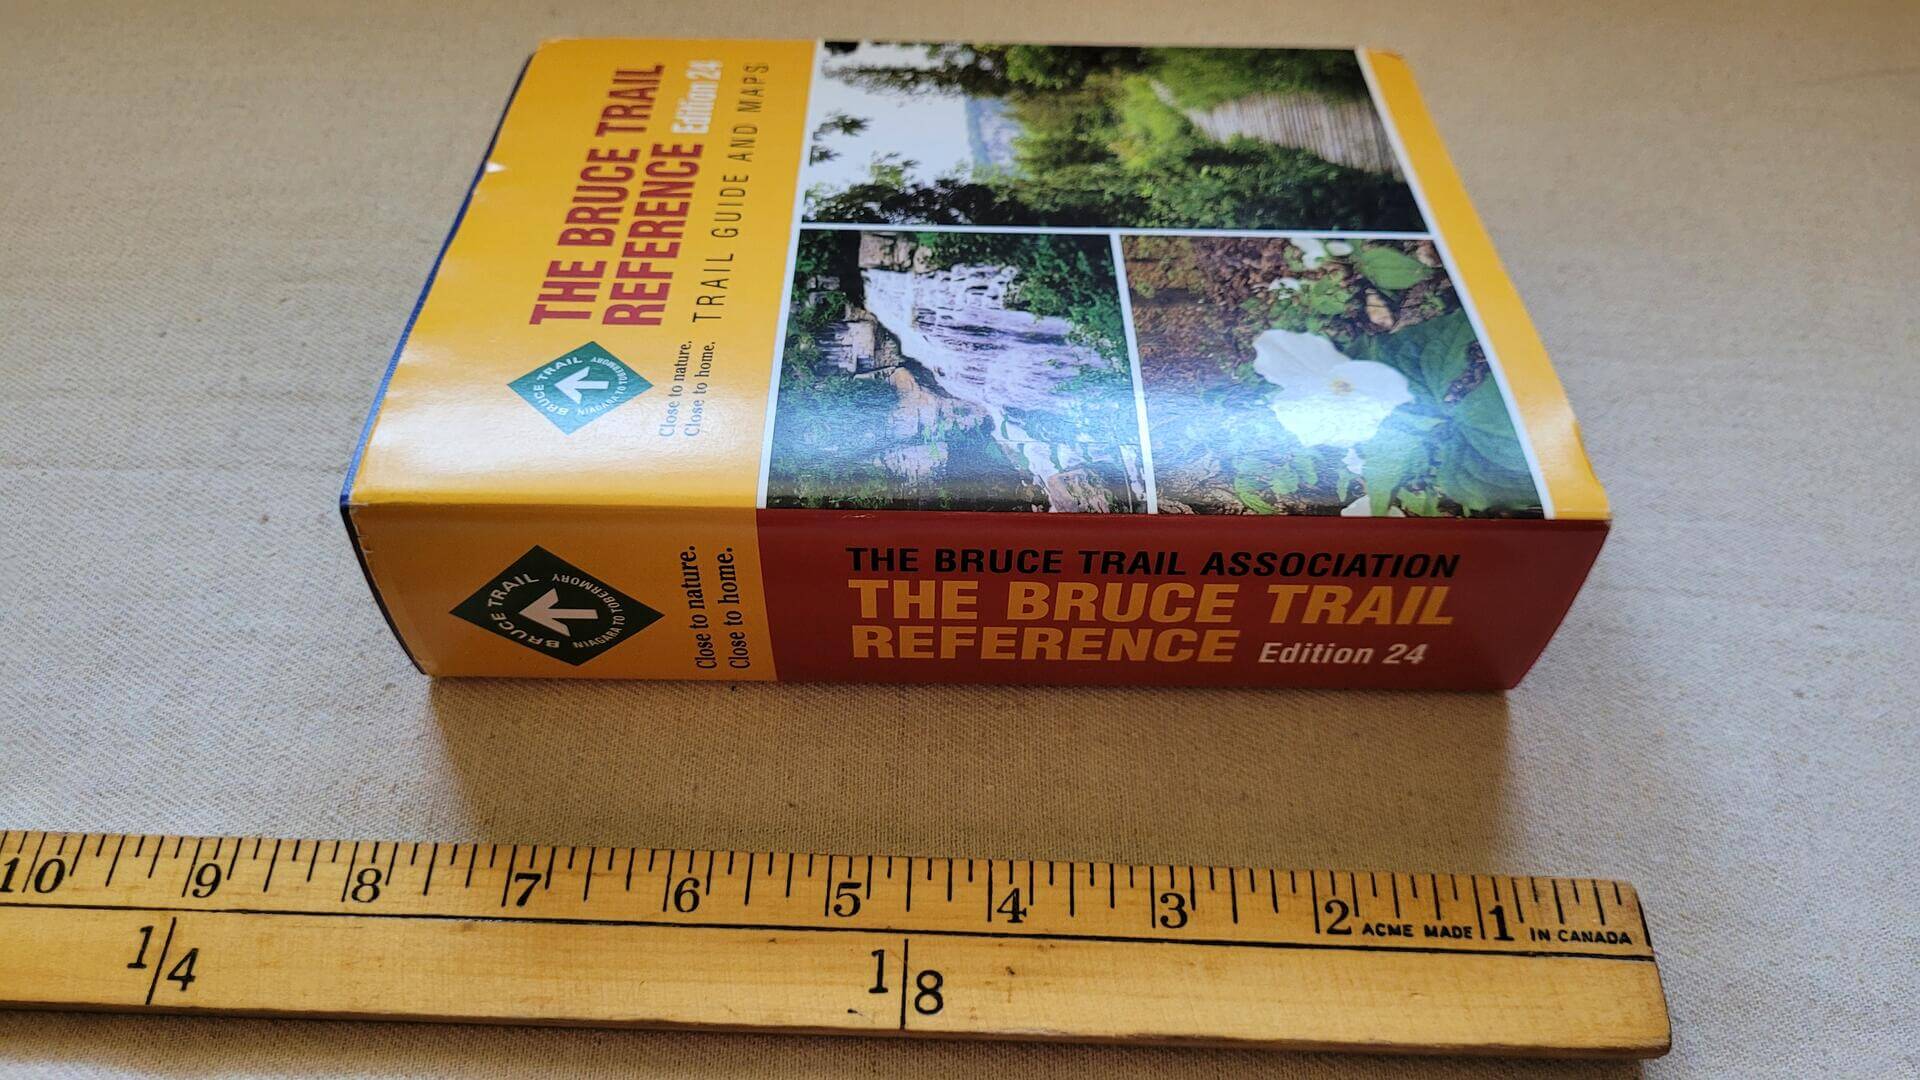 The Bruce Trail Reference Maps & Trail Guide is the definitive resource for exploring the Bruce Trail. Published by The Bruce Trail Association, this reference guidebook provides detailed maps, directions, descriptions & trip planning information on 890km of the oldest and longest continuous public footpath in Canada.